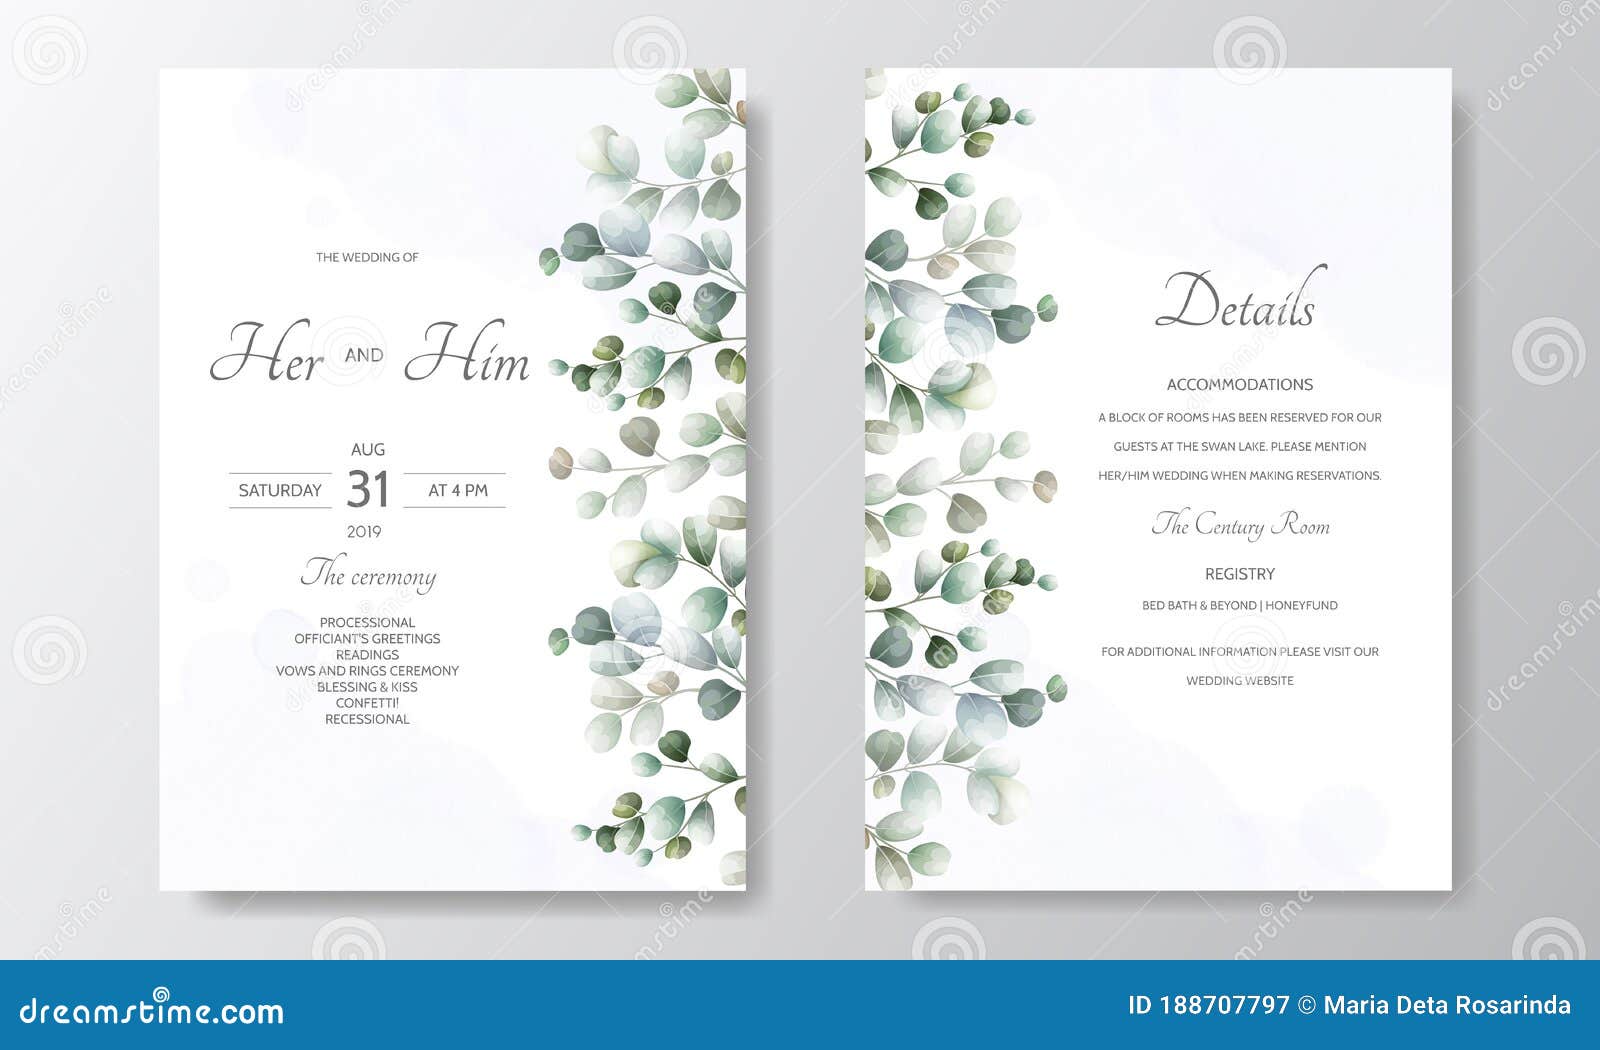 Free Wedding Accommodation Card Template from thumbs.dreamstime.com